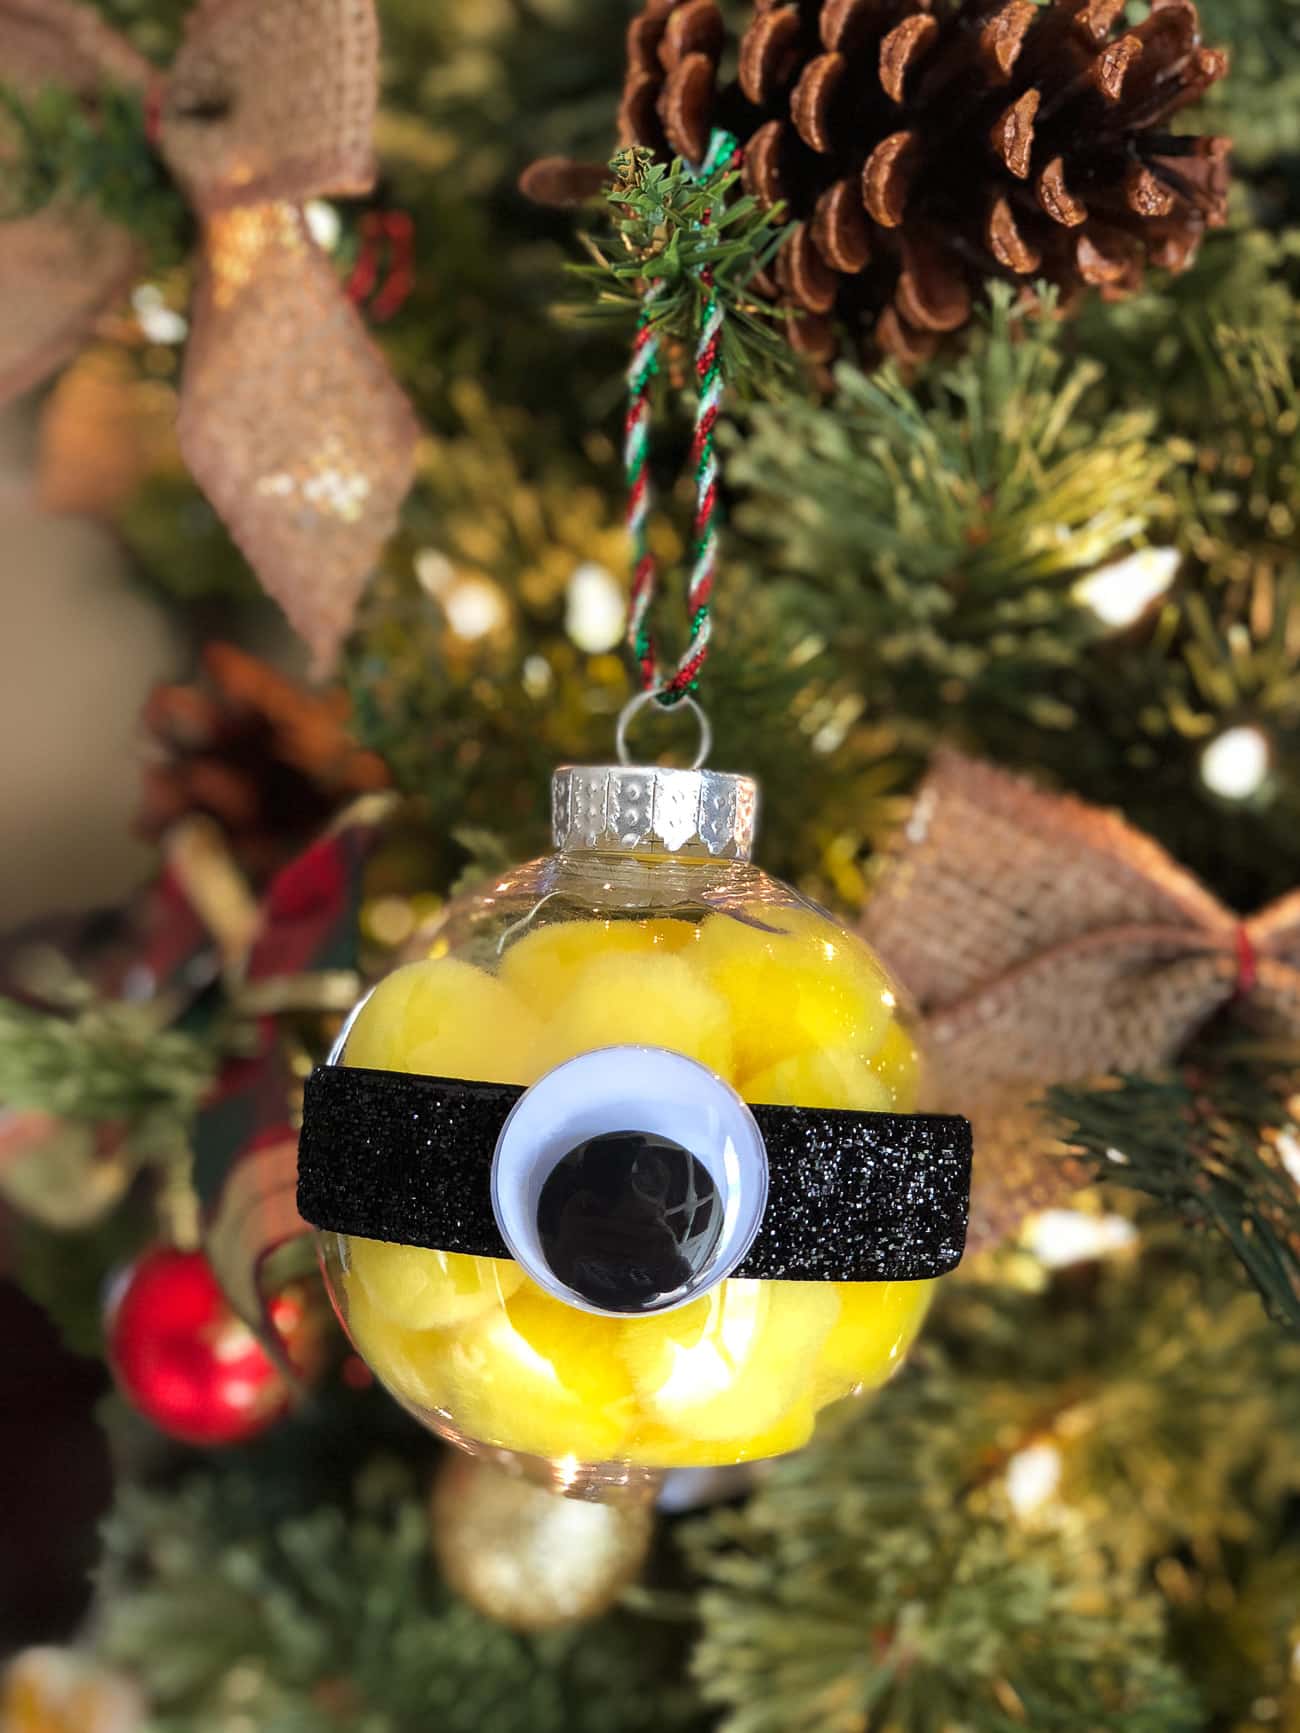 Despicable Me 3 - Minions Christmas Ornament Craft #Minions #DM3 #Ornament #Christmas